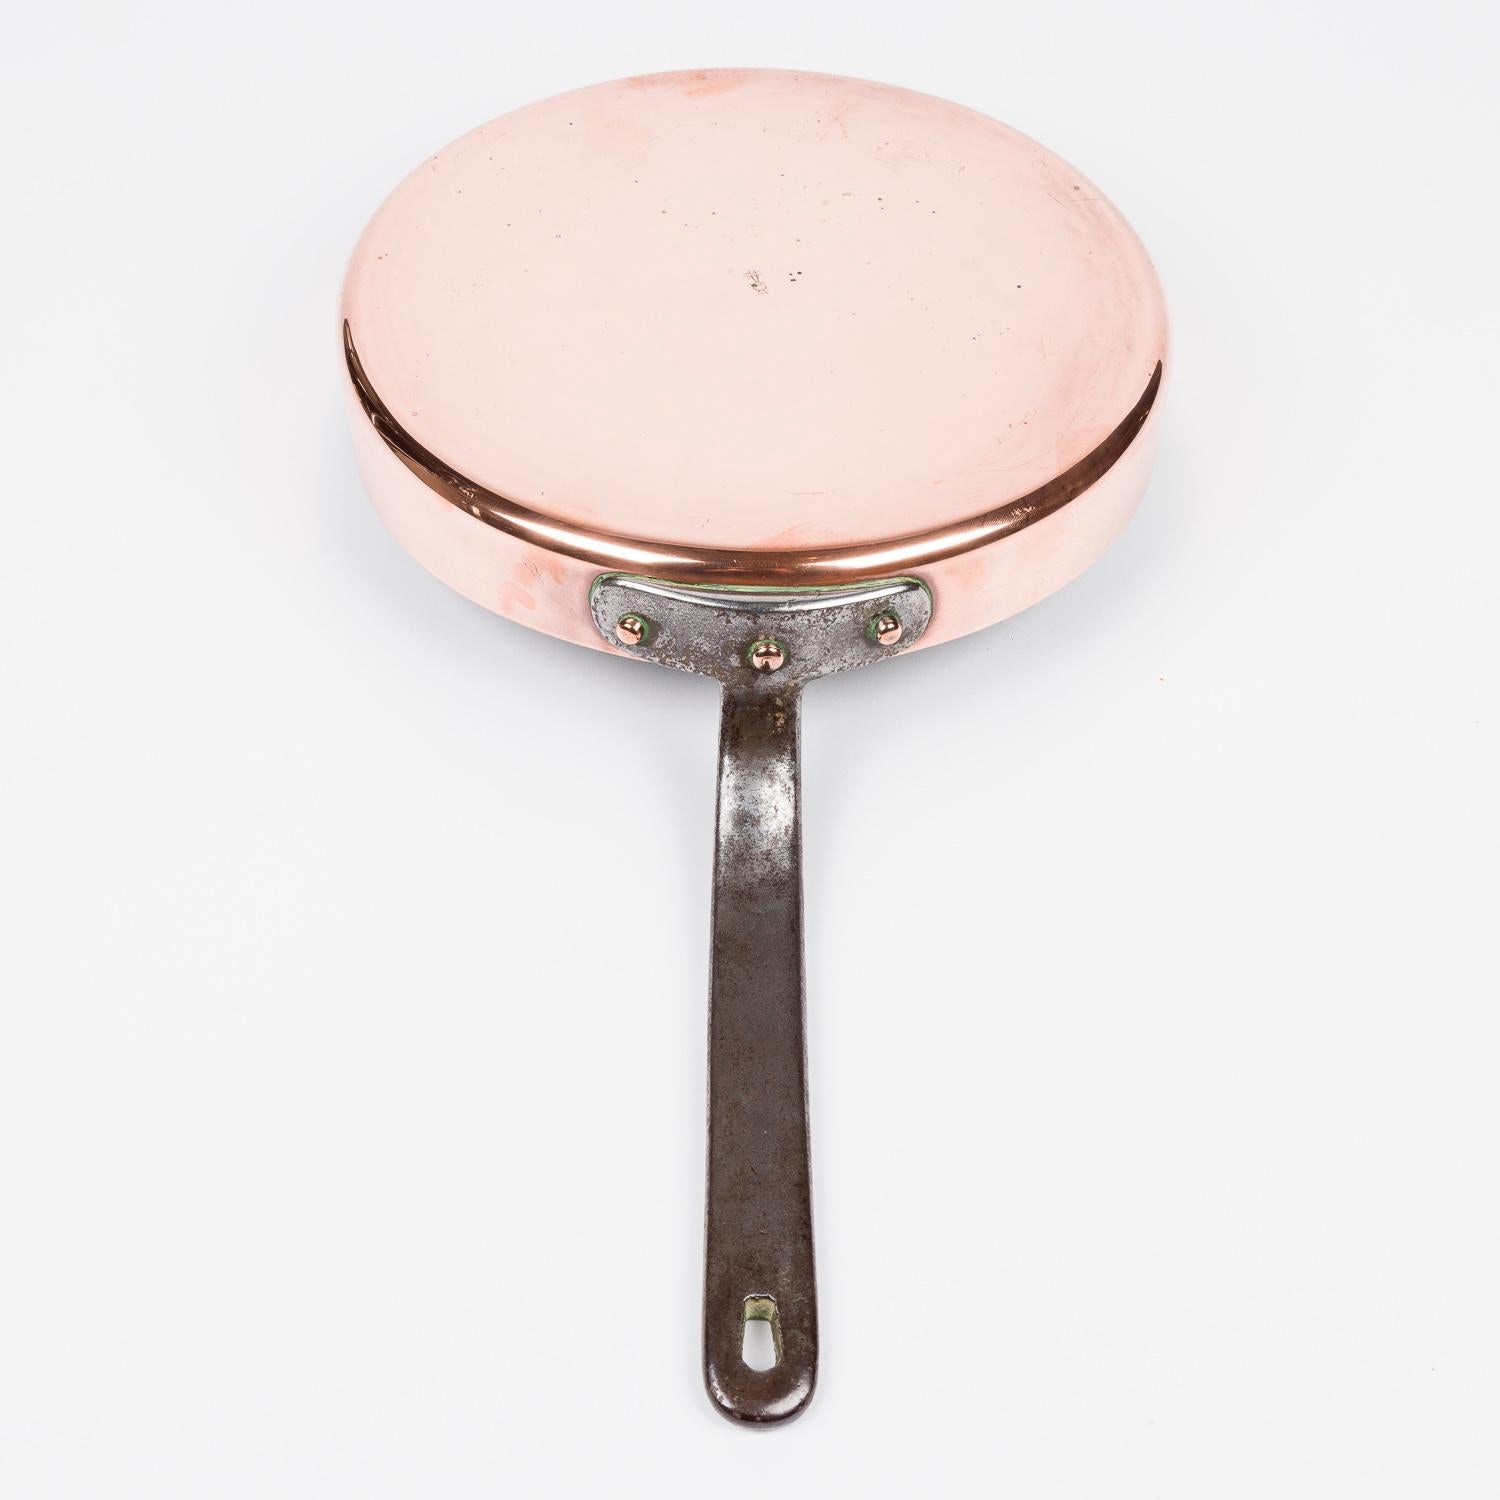 A late 19th century copper sauté pan by Benham & Froud of London, circa 1880.

Copper pan with tinned interior and riveted iron handle, with a hole for hanging.

Marked with the Benham & Froud Cross and Orb stamp.

 

Benham & Froud, Chandos St,